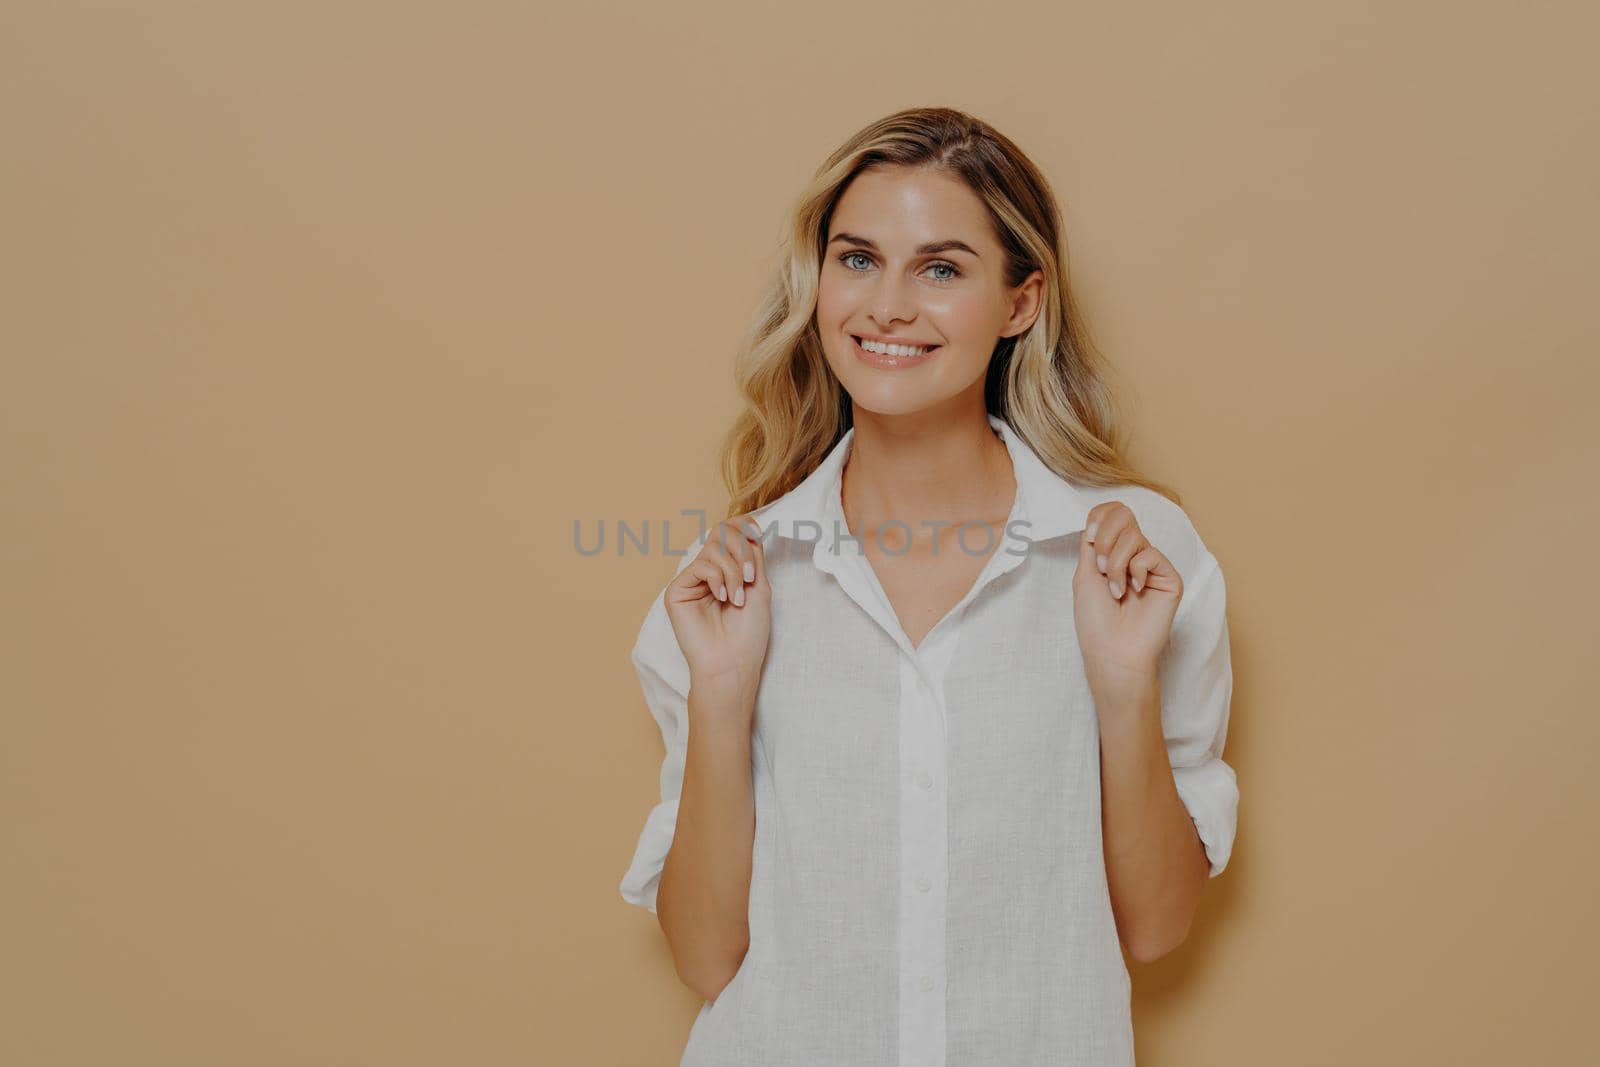 Expressing positivity. Young happy good looking woman with blond dyed hair in white shirt smiling cheerfully and looking at camera with playful facial expression,posing isolated over wall in studio